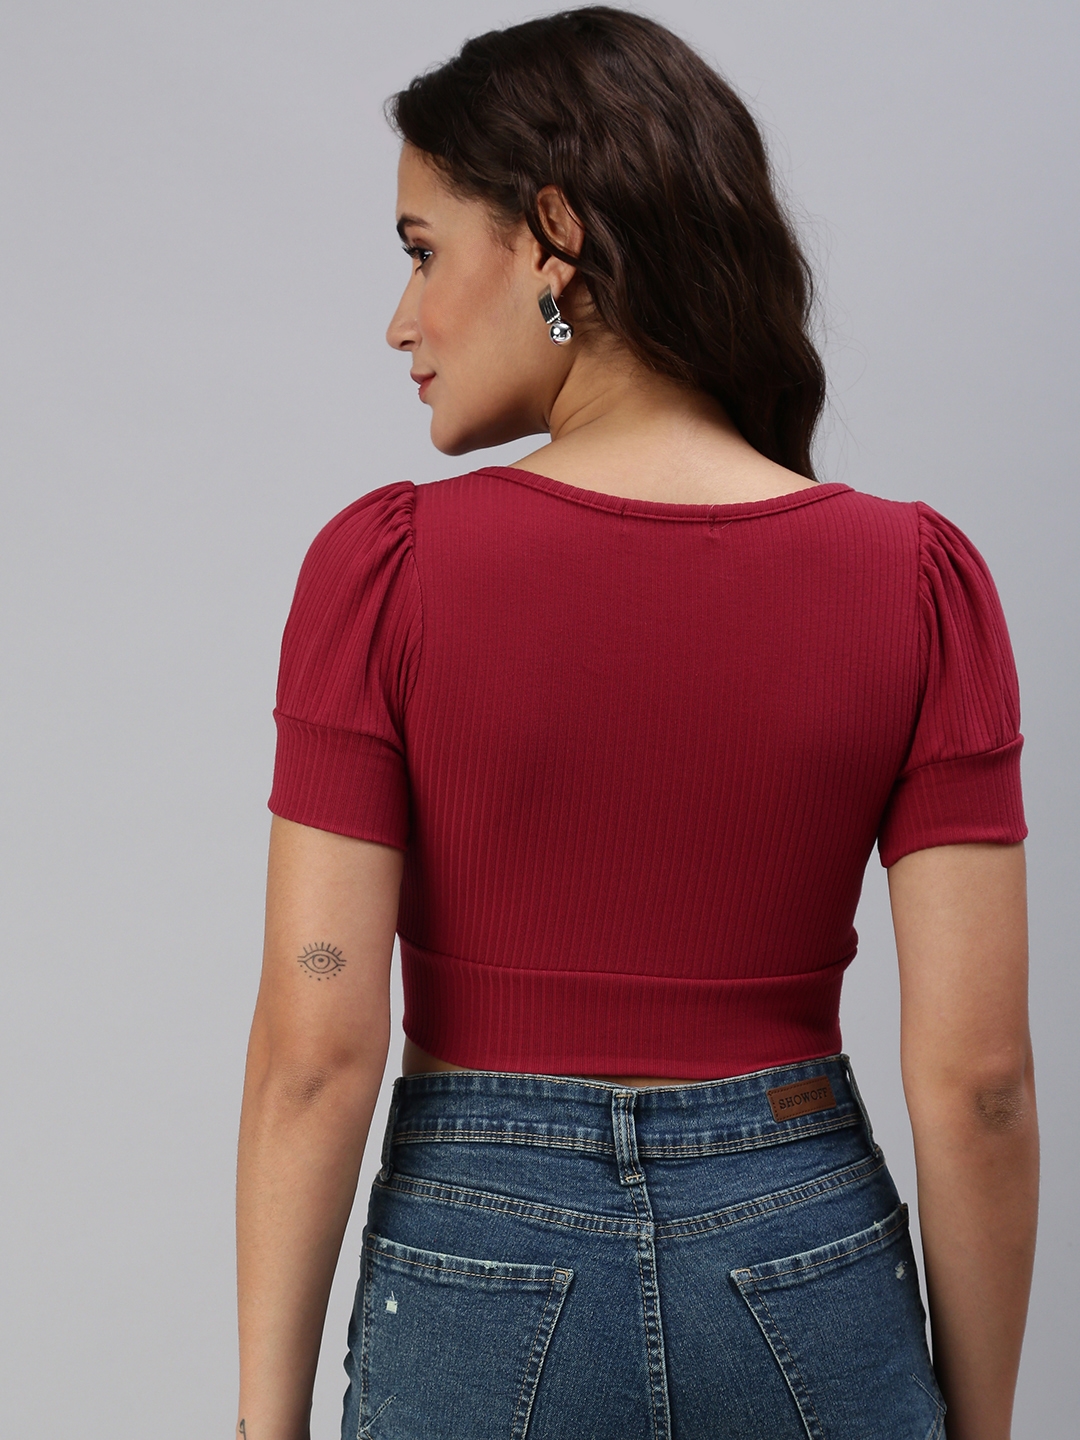 Women's Red Cotton Blend Solid Crop Top